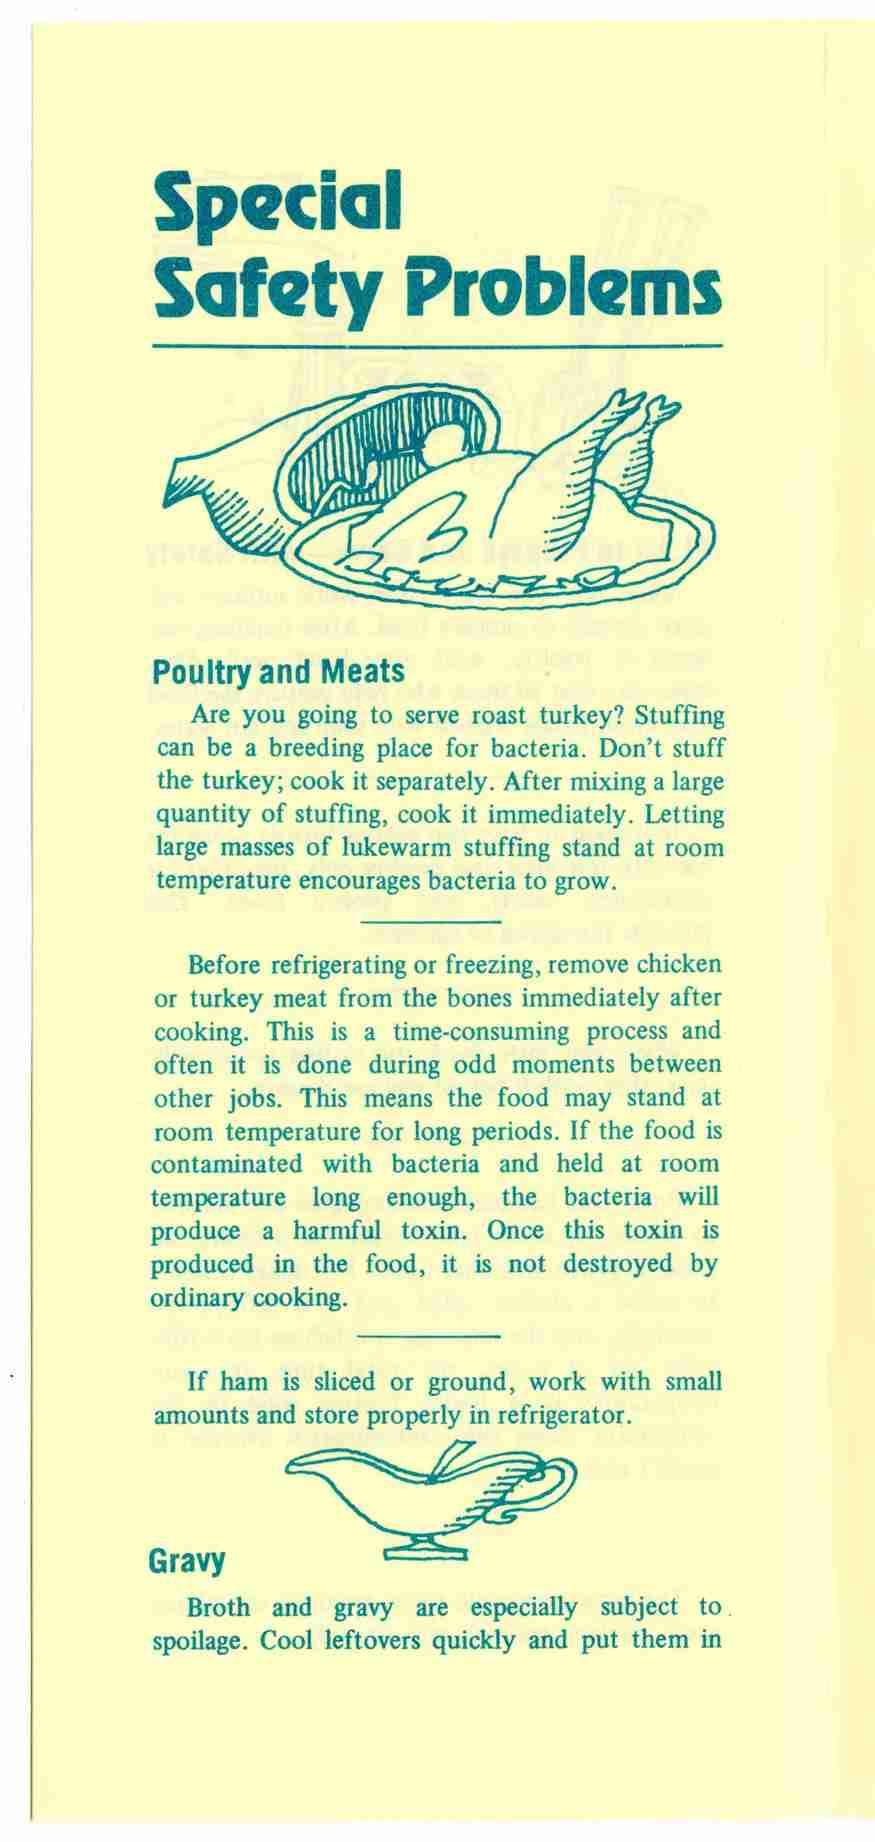 Special Safety Problems Poultry and Meats Are you going to serve roast turkey? Stuffing can be a breeding place for bacteria. Don t stuff the turkey; cook it separately.